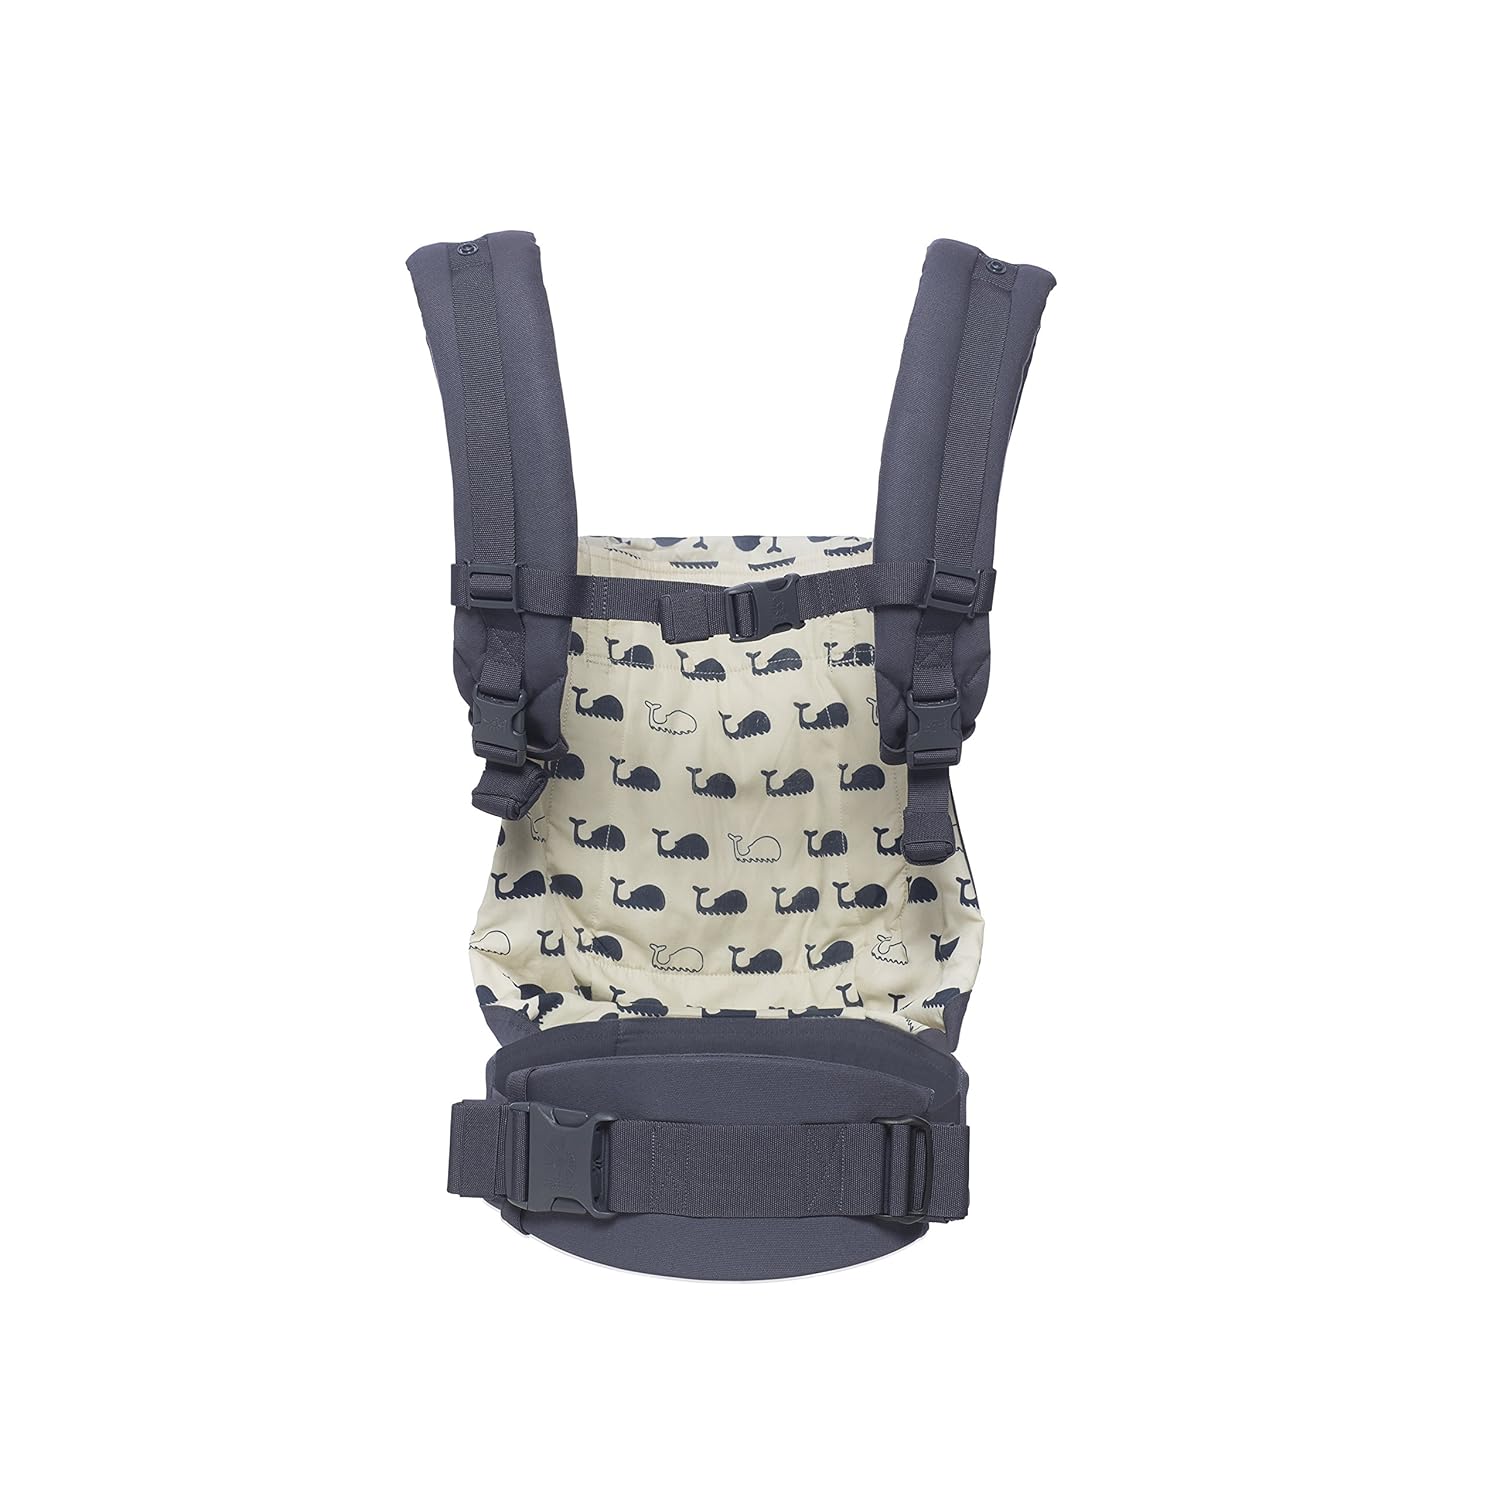 Ergobaby Baby Carrier Original Collection Ergonomic 3-Position Baby Carrier and Back Carrier Collection 2018